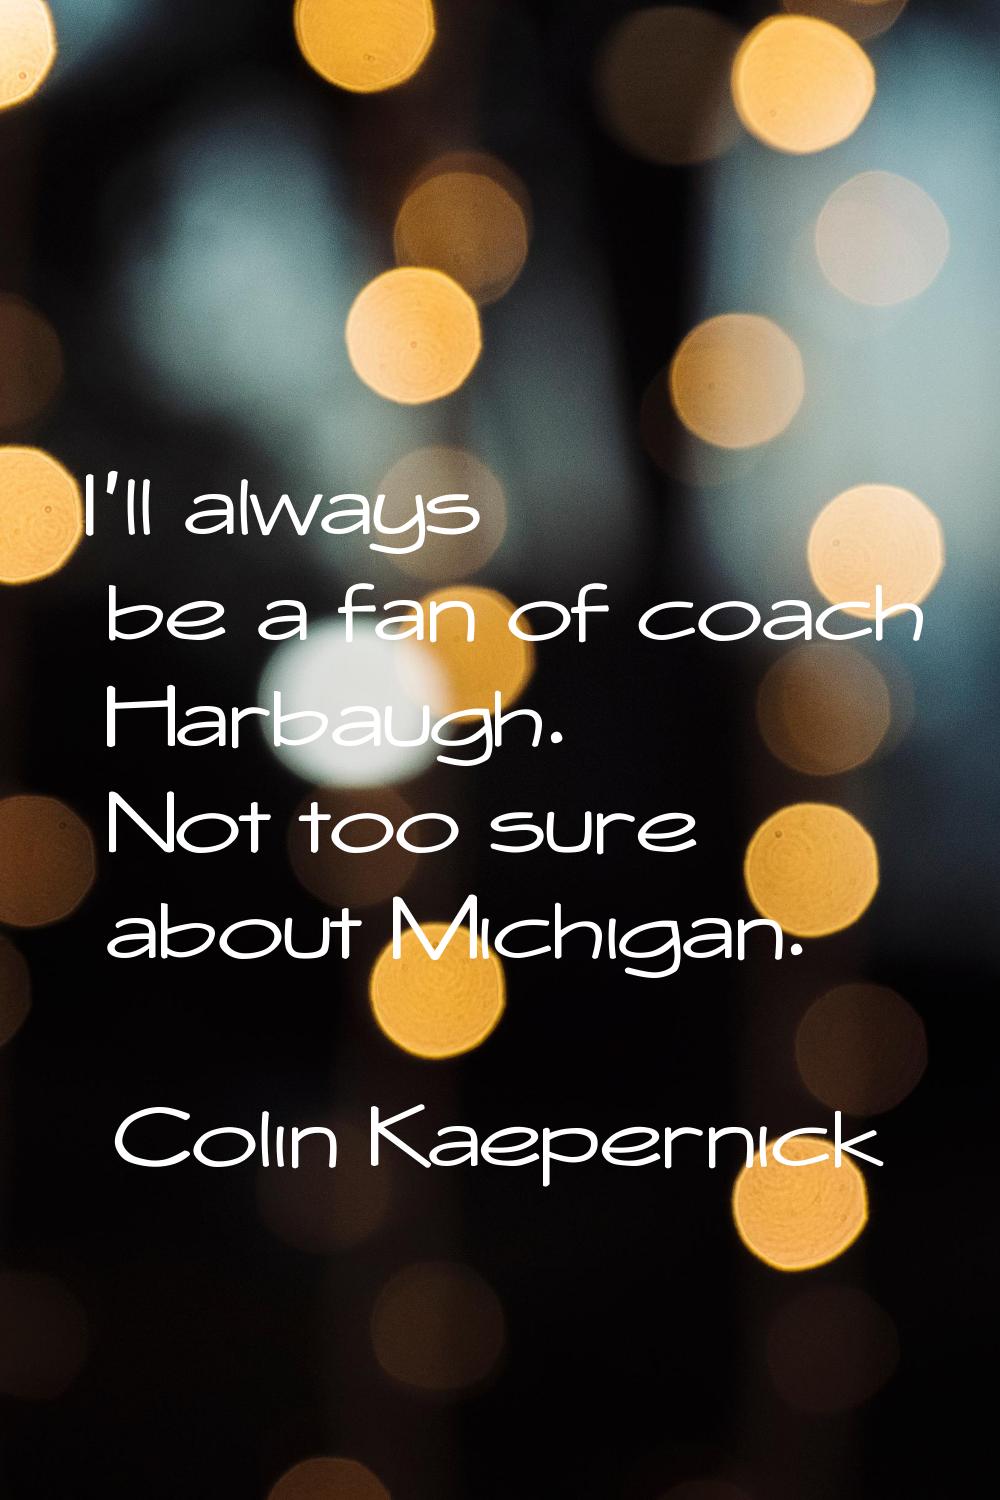 I'll always be a fan of coach Harbaugh. Not too sure about Michigan.